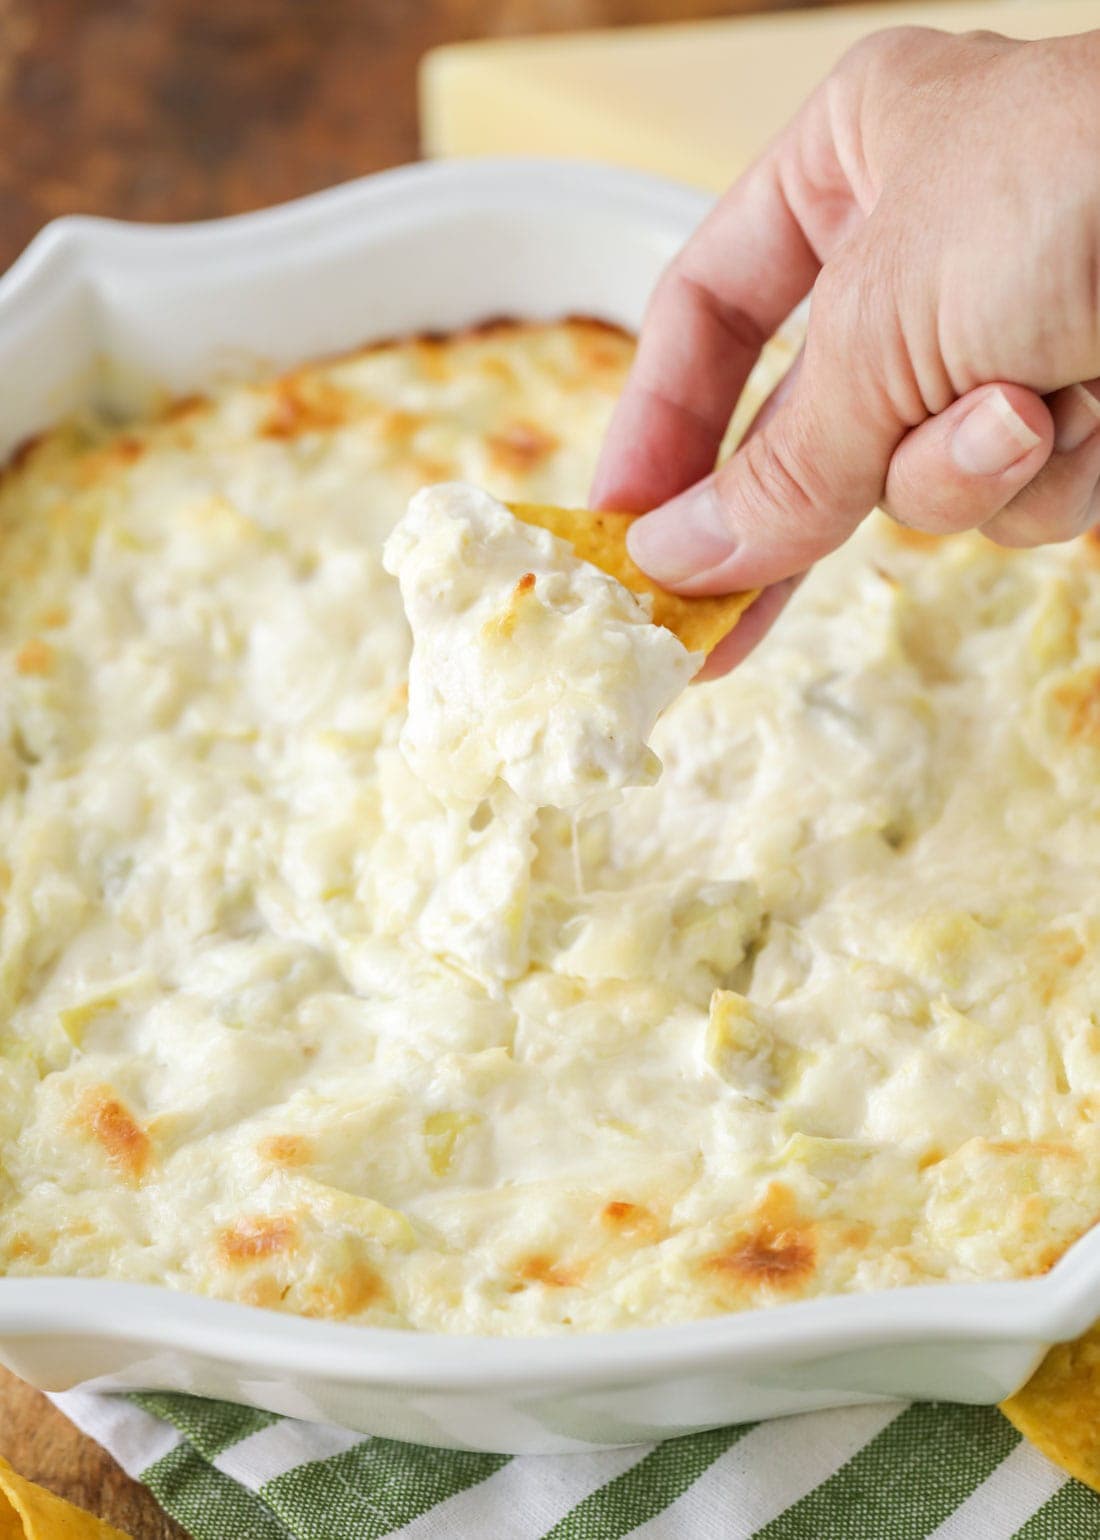 A hand dipping a chip into hot artichoke dip